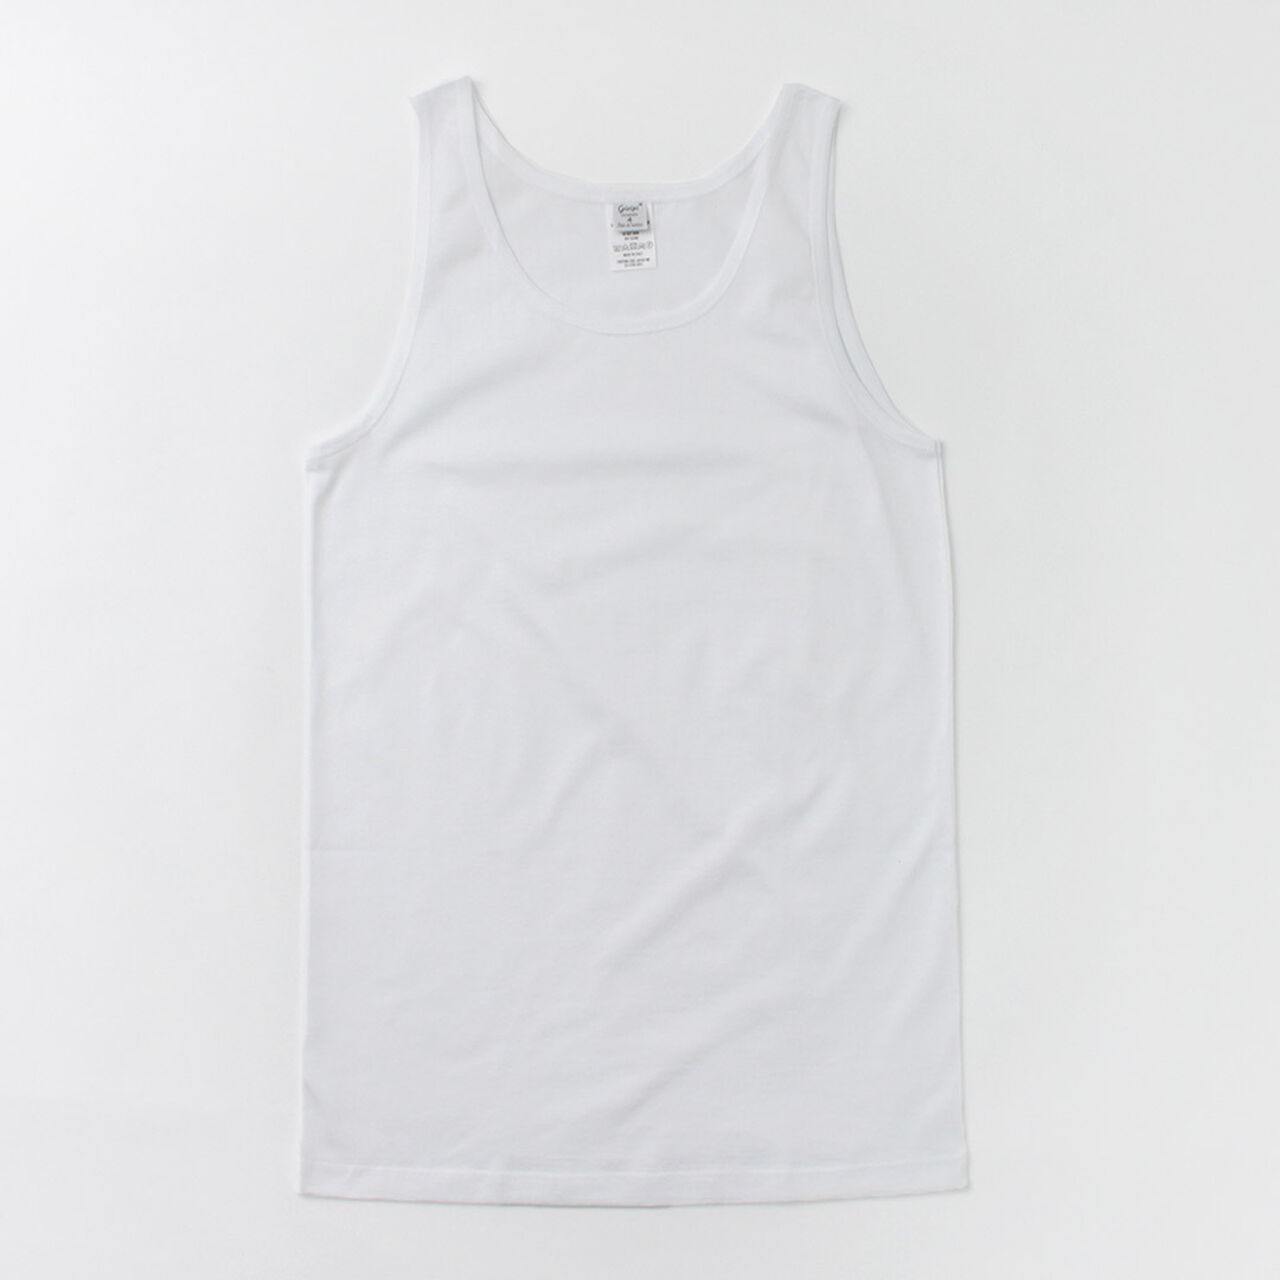 Maggiore Basic Tank Top,Bianco, large image number 0